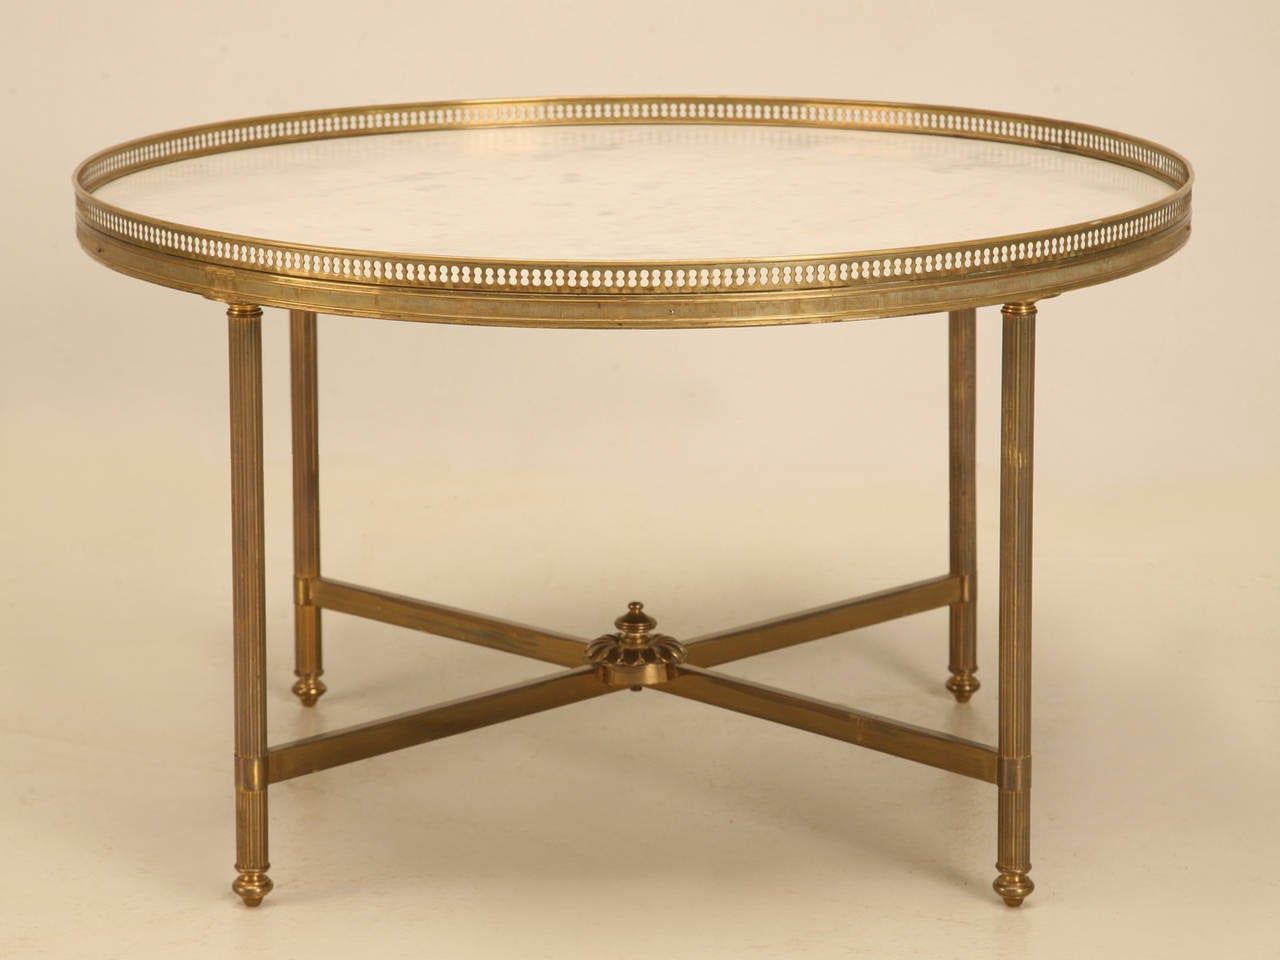 Current Vintage French Marble And Brass Cocktail Or Coffee Table At 1stdibs Intended For Antique Brass Round Cocktail Tables (View 10 of 10)